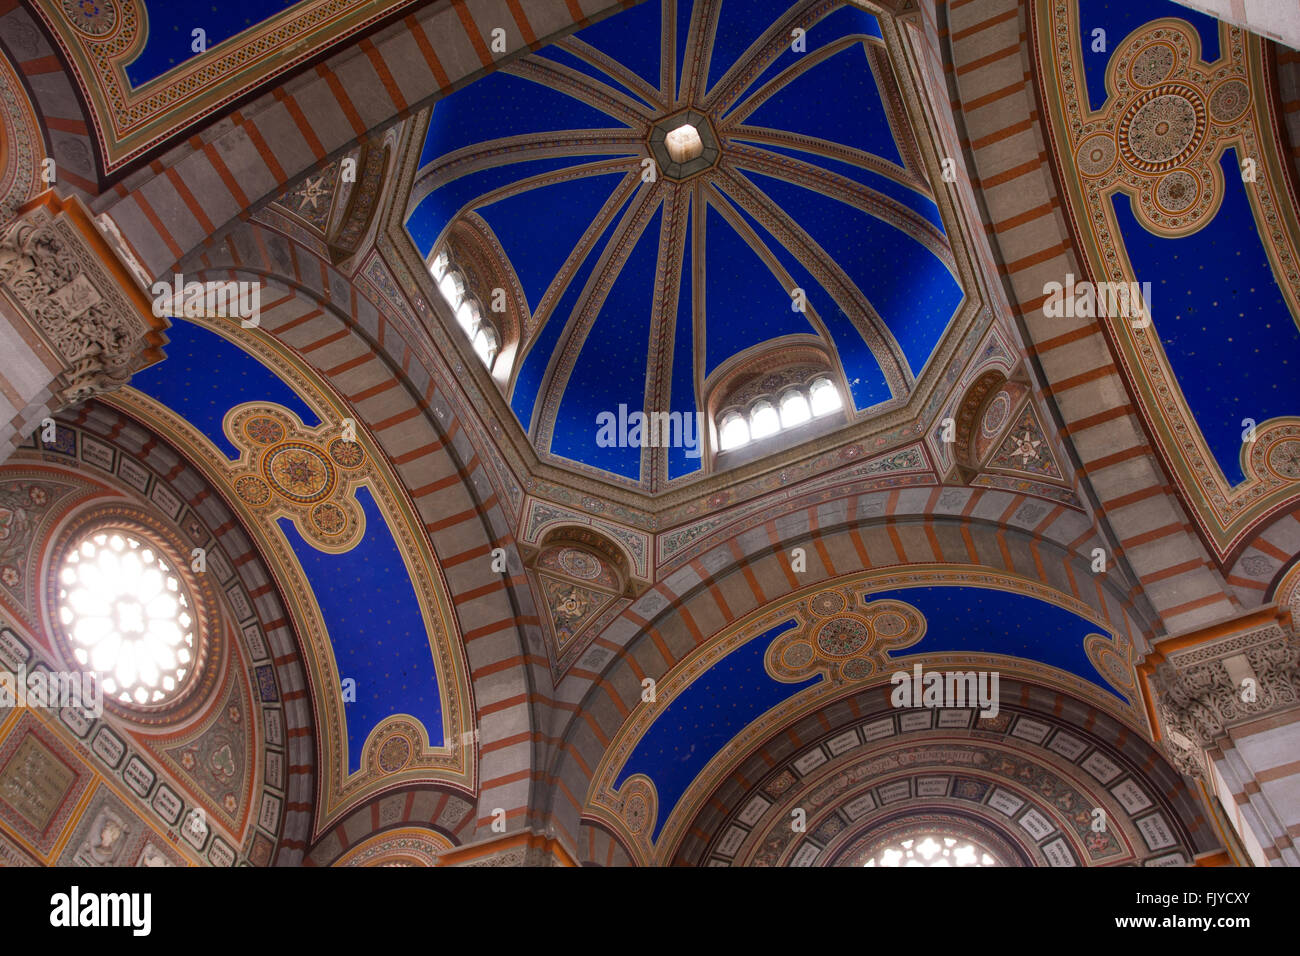 Interior Of Cathedral Dome Stock Photo